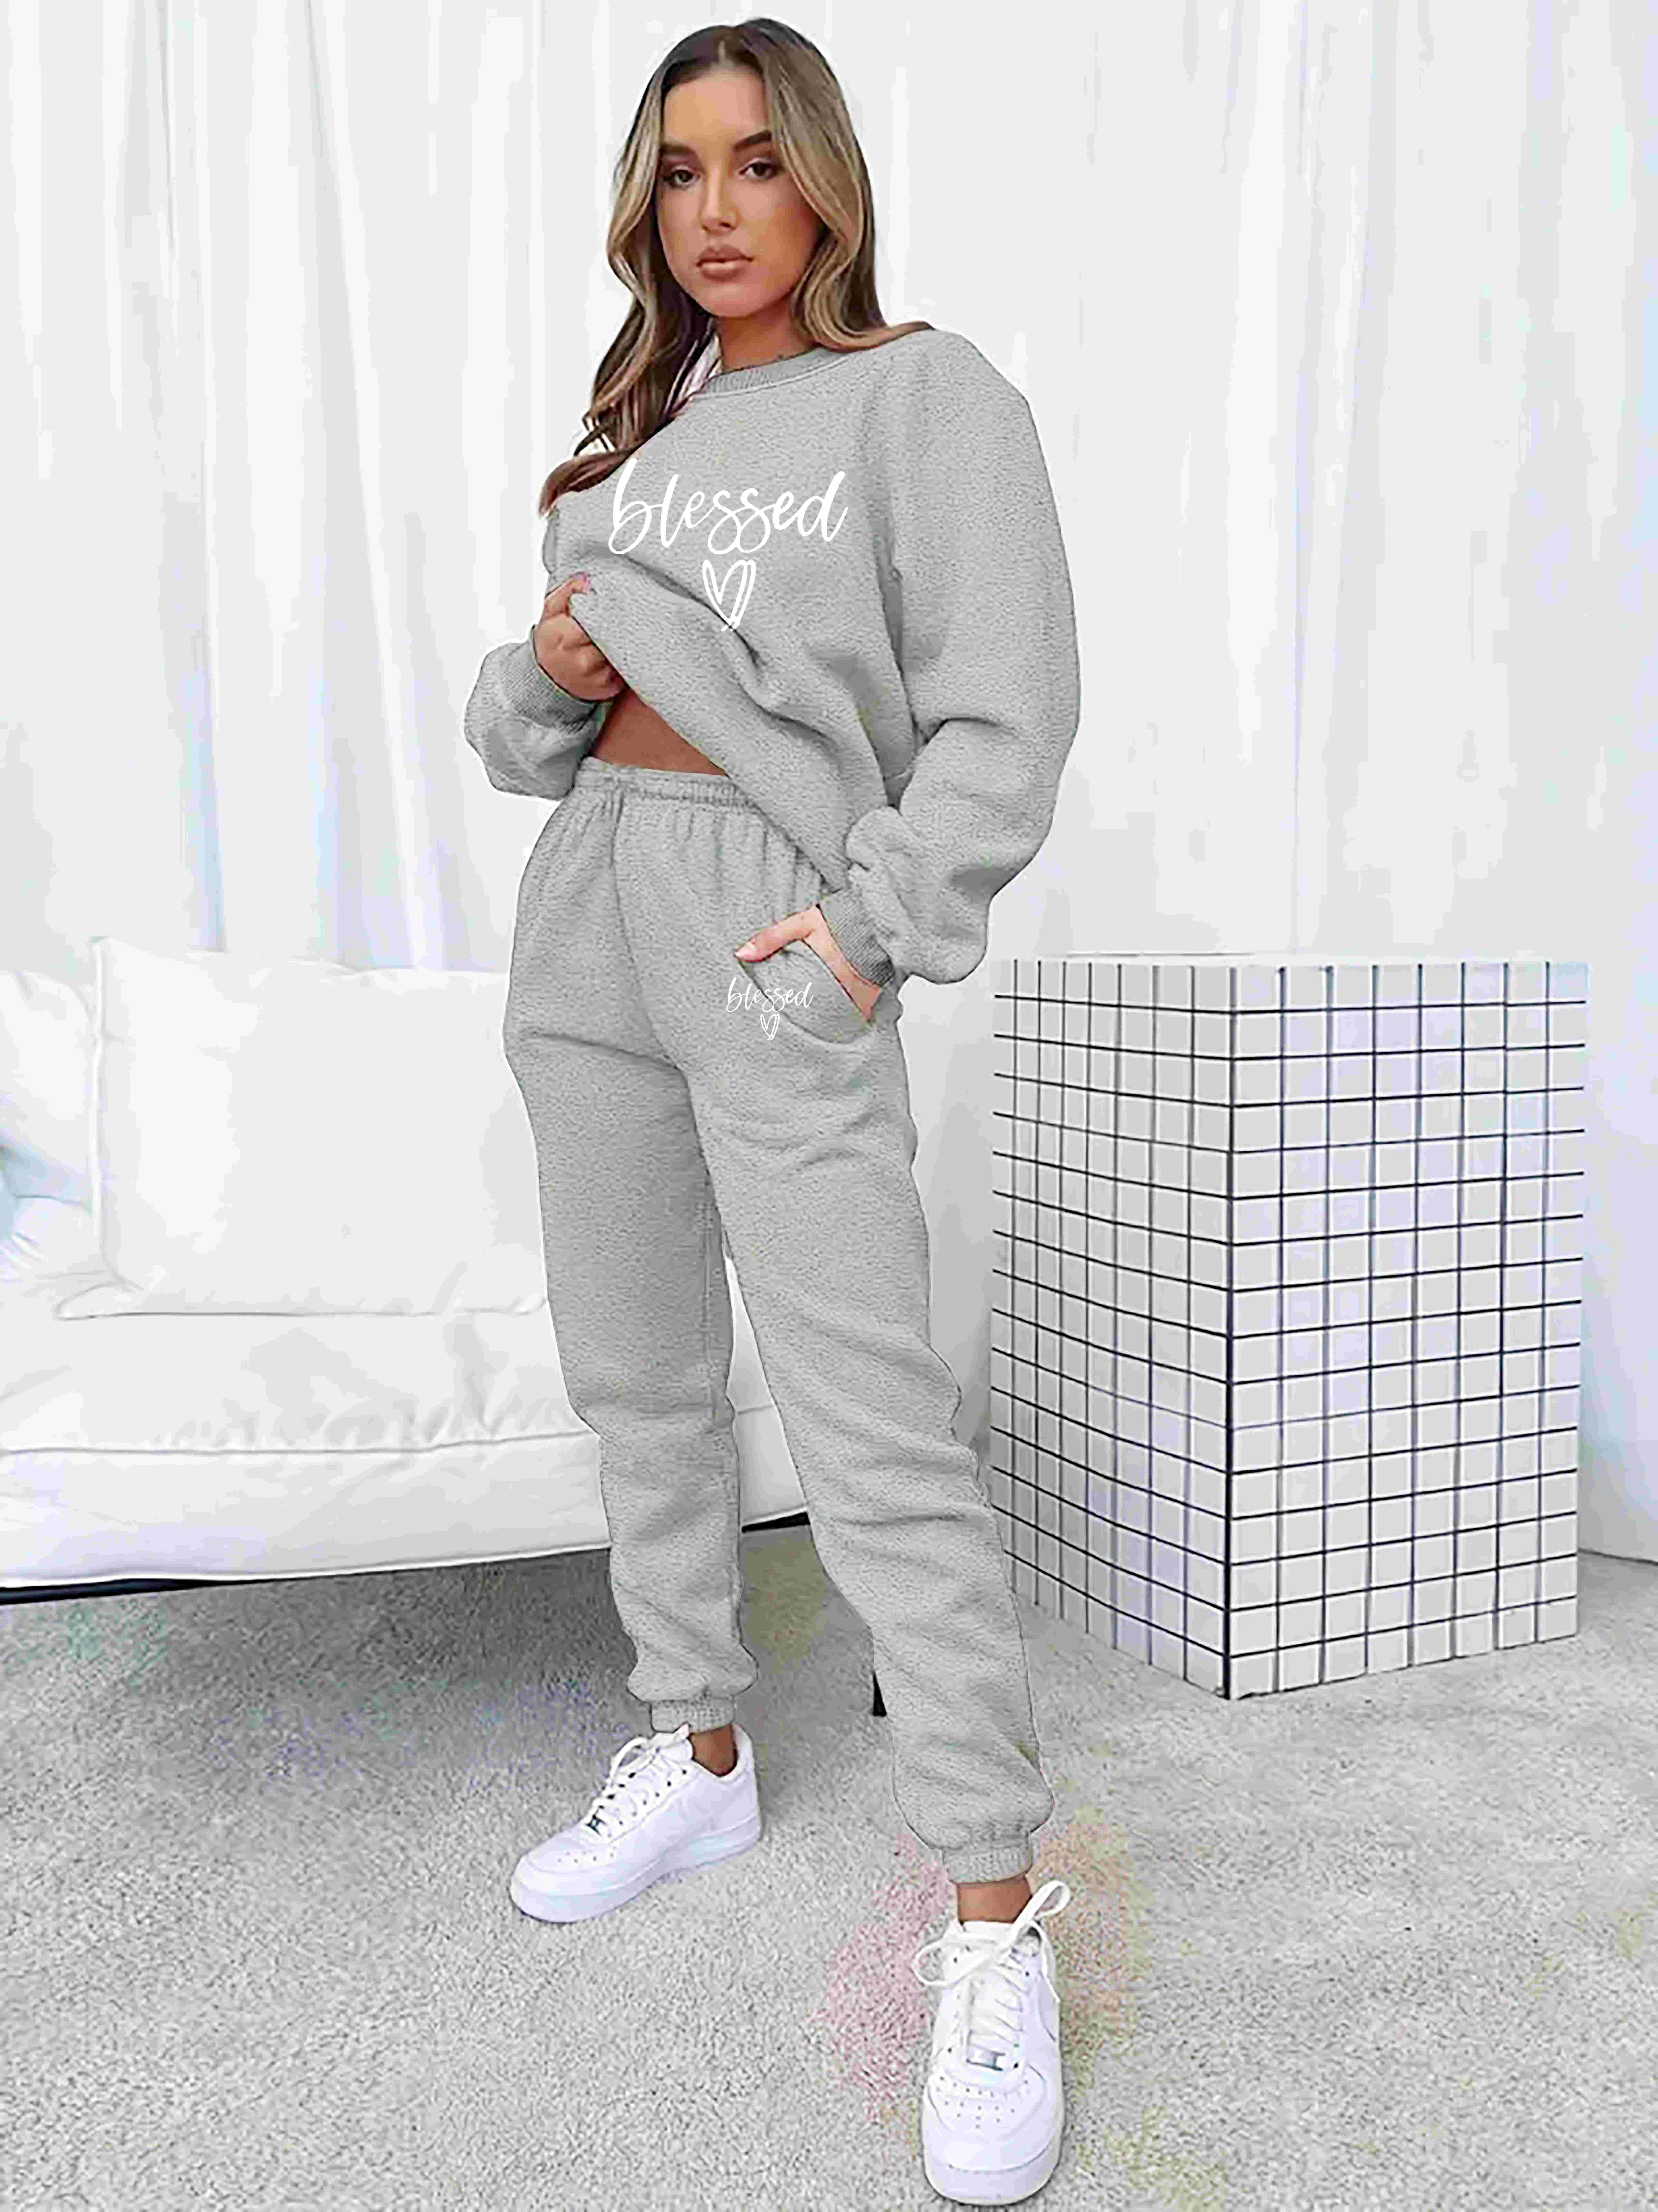 Fall Clearance Sale! RQYYD Women Hoodies Tracksuit Long Sleeve Sweatshirts  Jogger Pants Sweatpants Jogging Suits 2 Piece Outfits Casual Hooded Lounge